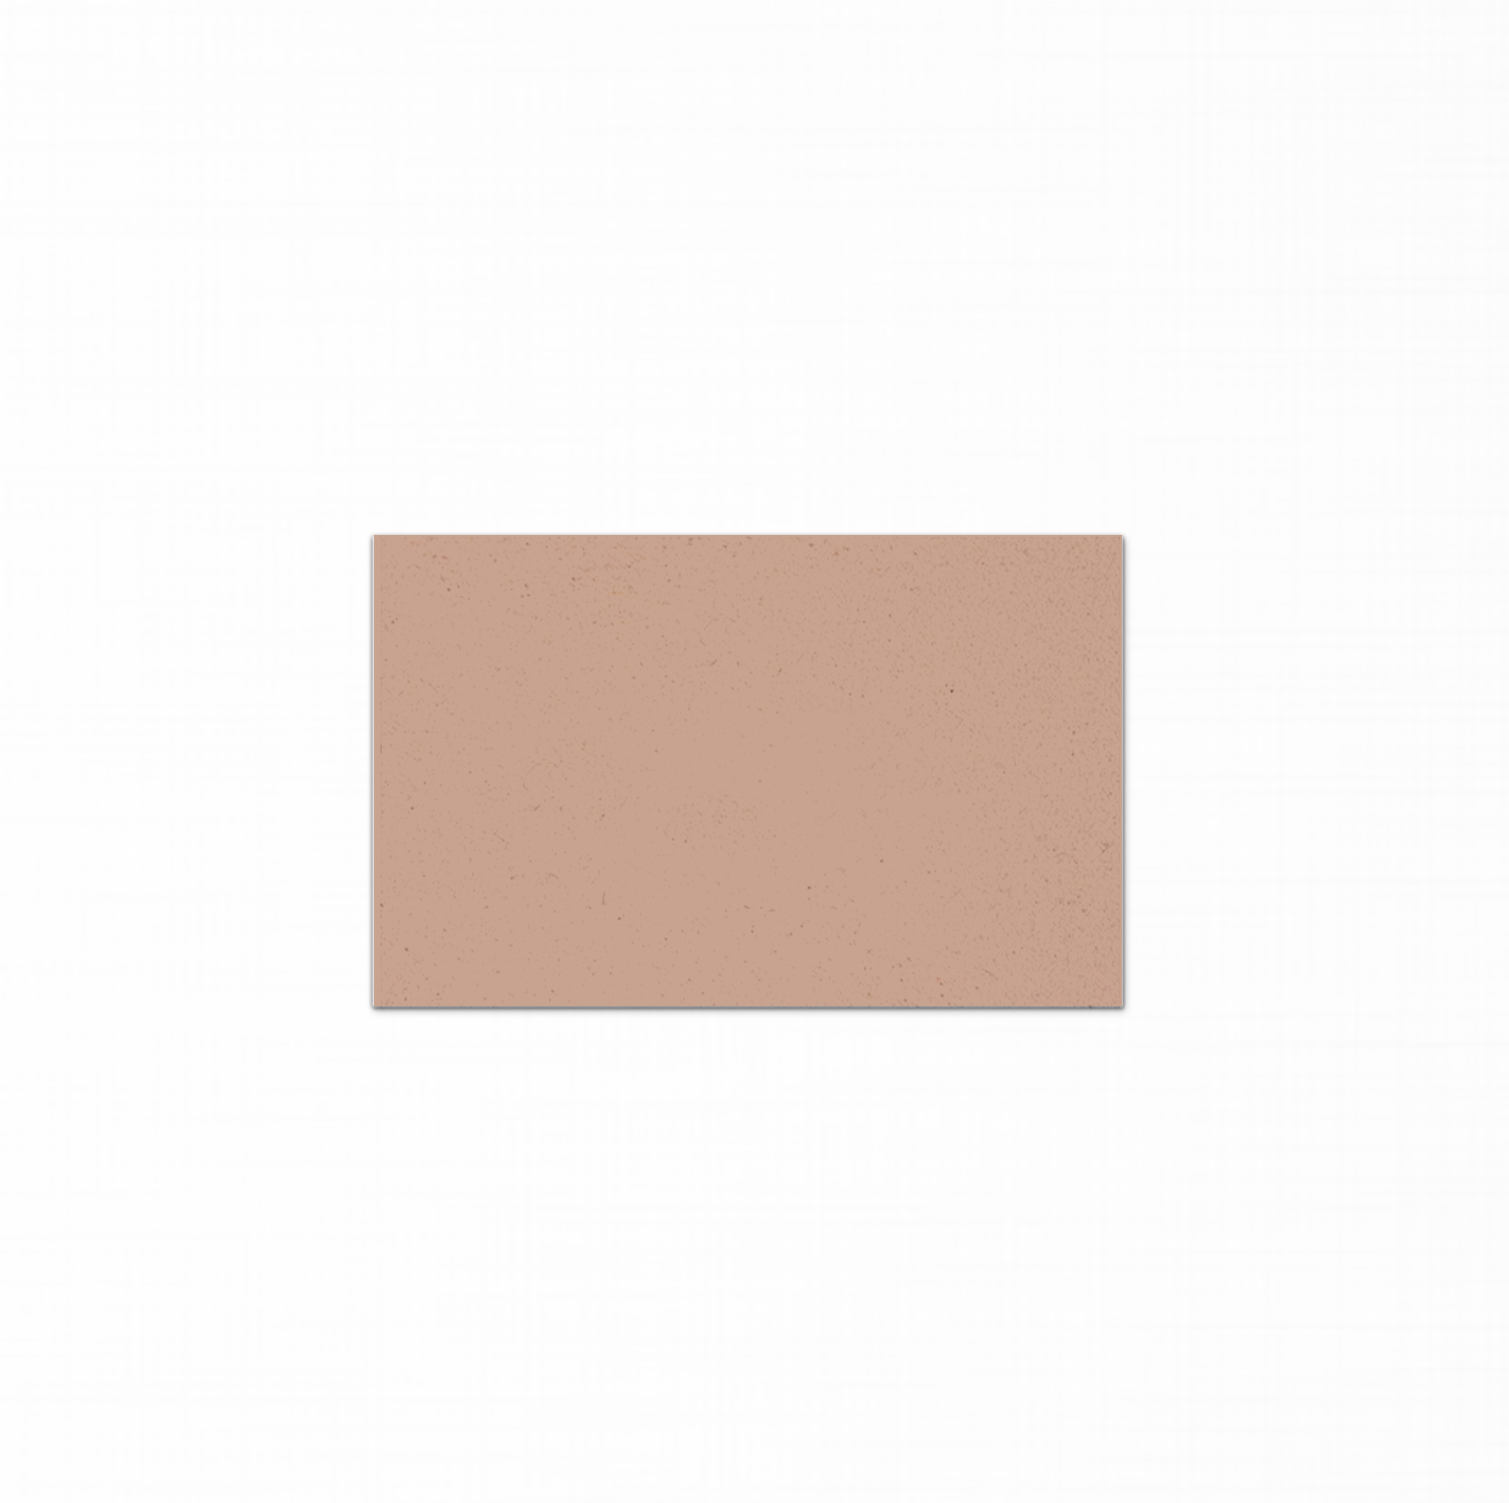 ROMANCE, a feminine and flirty pink cement that's not too sweet because it leans towards coral. Pair it with black and white for a counterpoint or add a deep brown to balance the softness of the pink. This couture cement color is available exclusively at Desire Tile. 